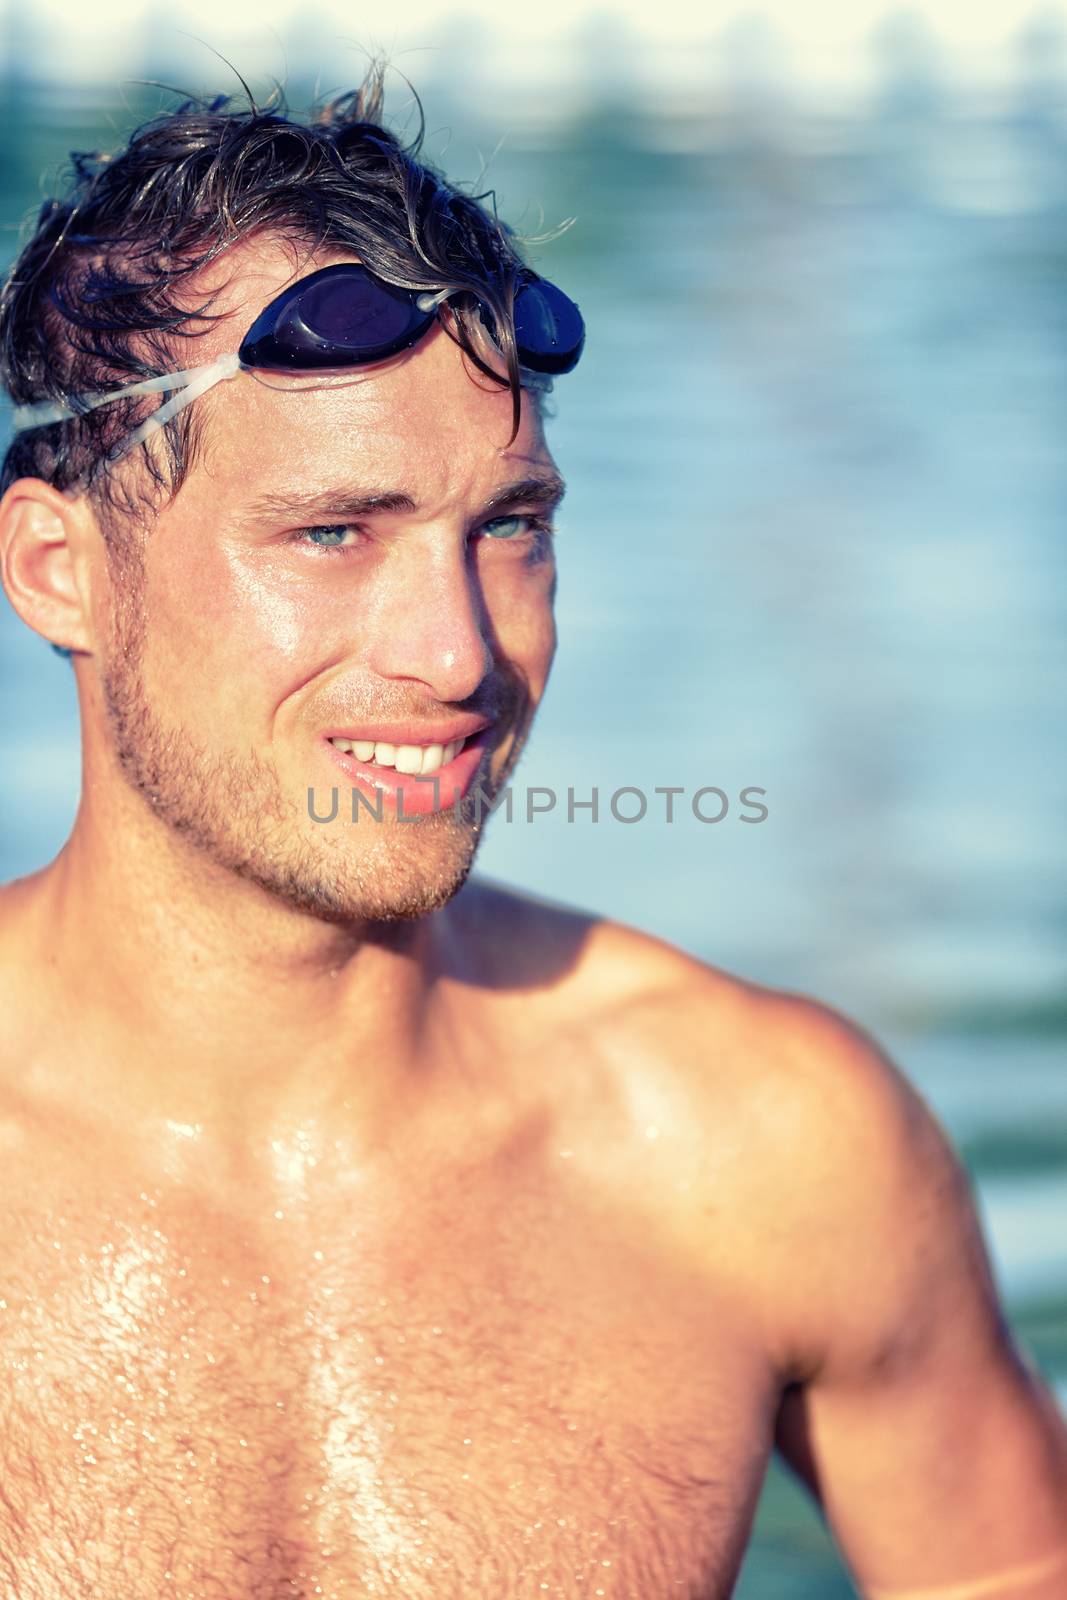 Athlete swimmer in swimming pool with swim goggles. Handsome young professional male sports adult portrait looking happy after cardio workout exercising in outdoor water, topless wearing swimwear.